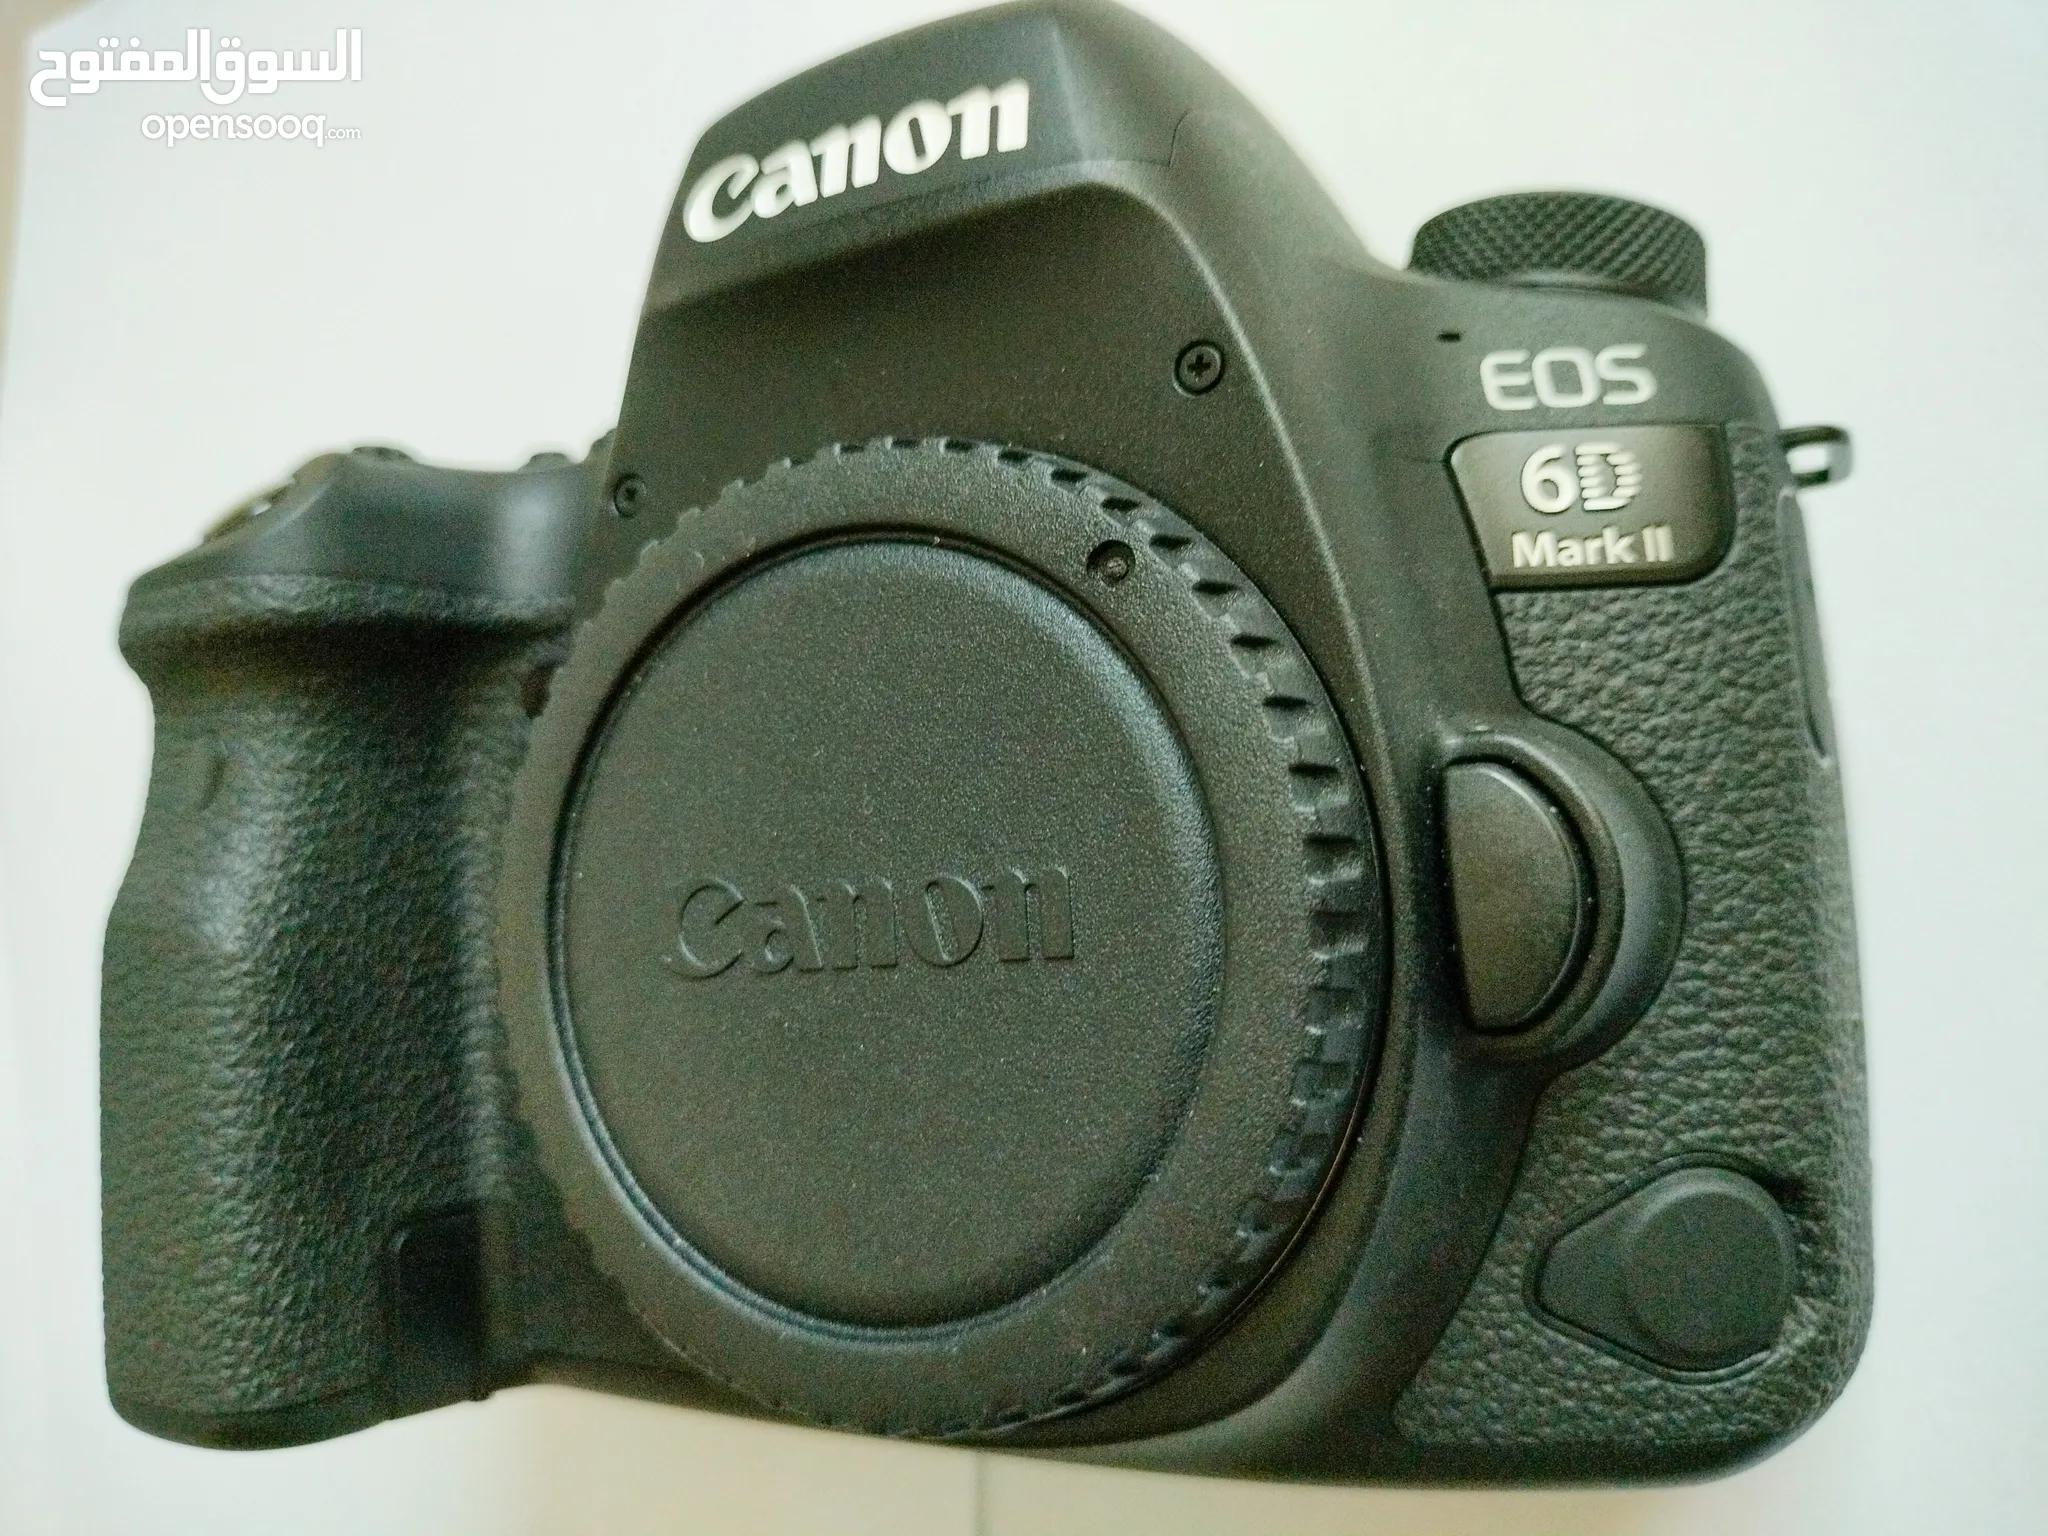 DSLR Cameras for Sale in UAE: New & Used: Best Prices